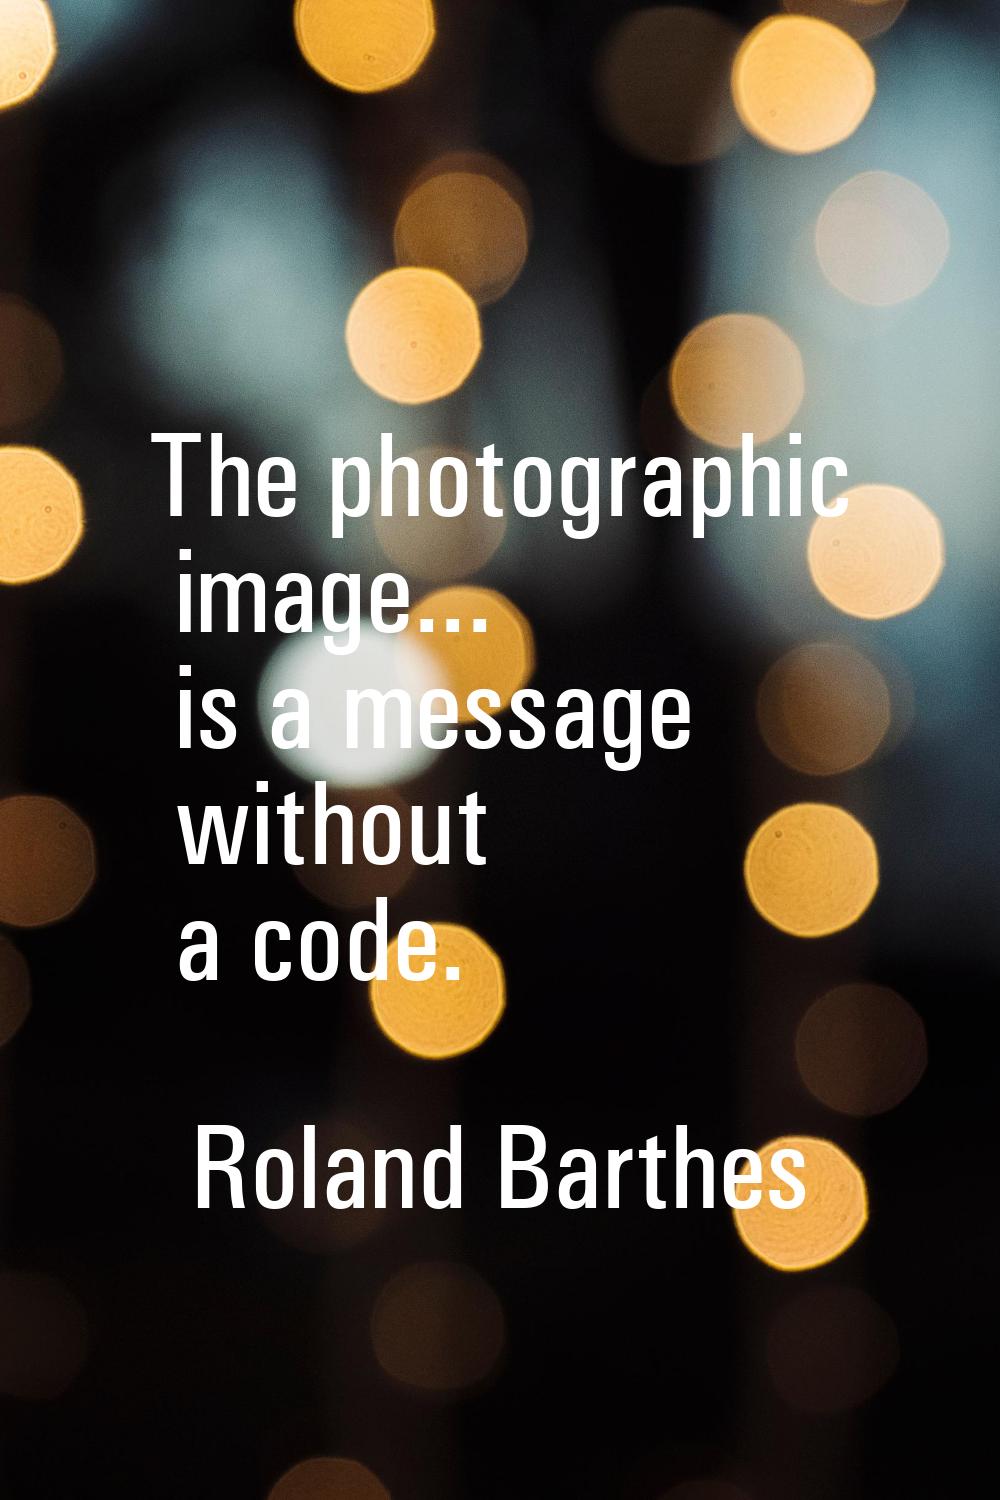 The photographic image... is a message without a code.